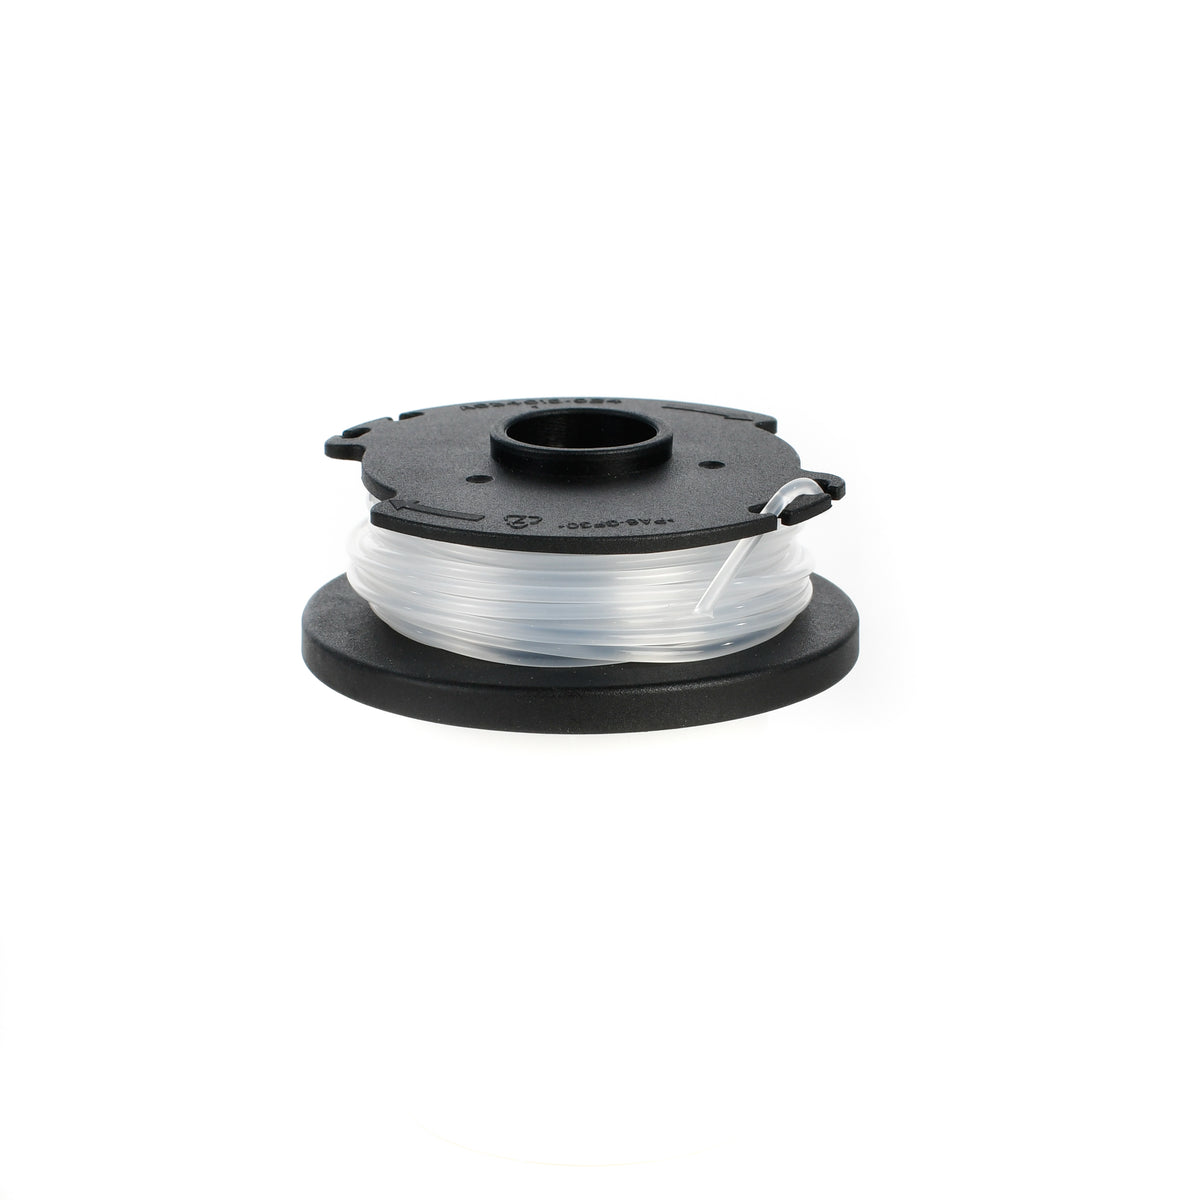 Black and Decker BLACK+DECKER Trimmer Line Replacement Spool, Dual